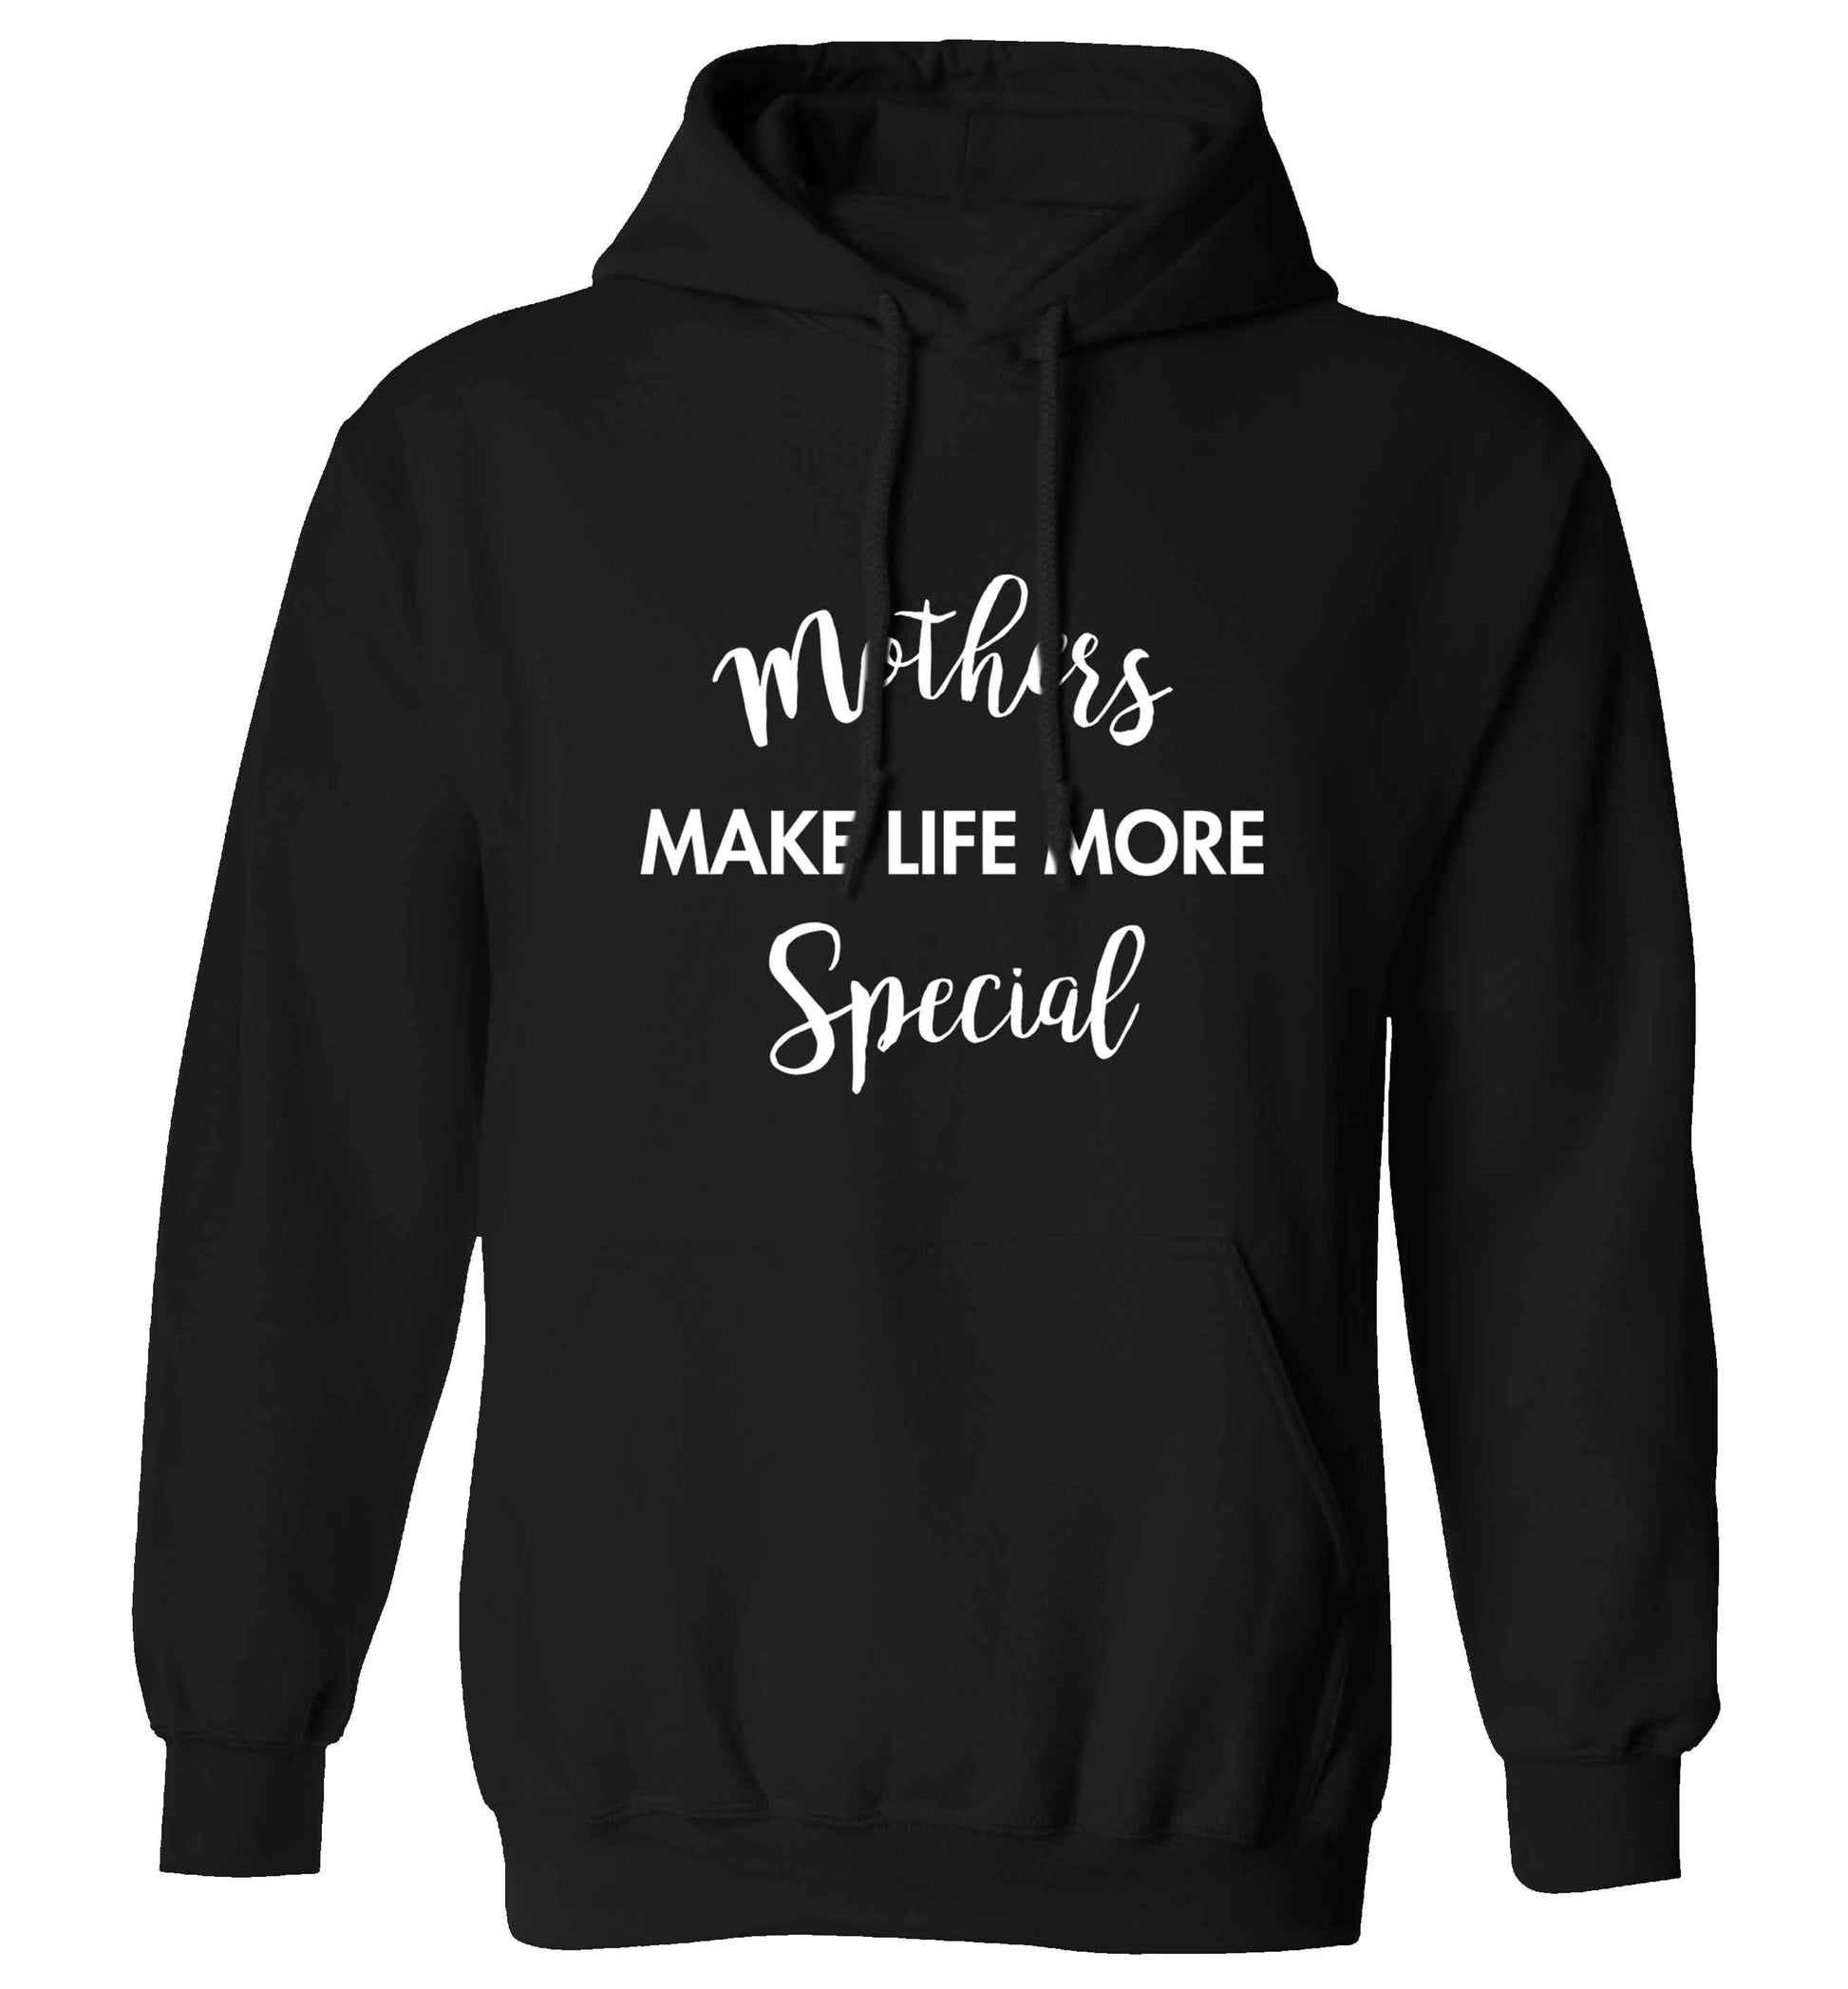 Mother's make life more special adults unisex black hoodie 2XL